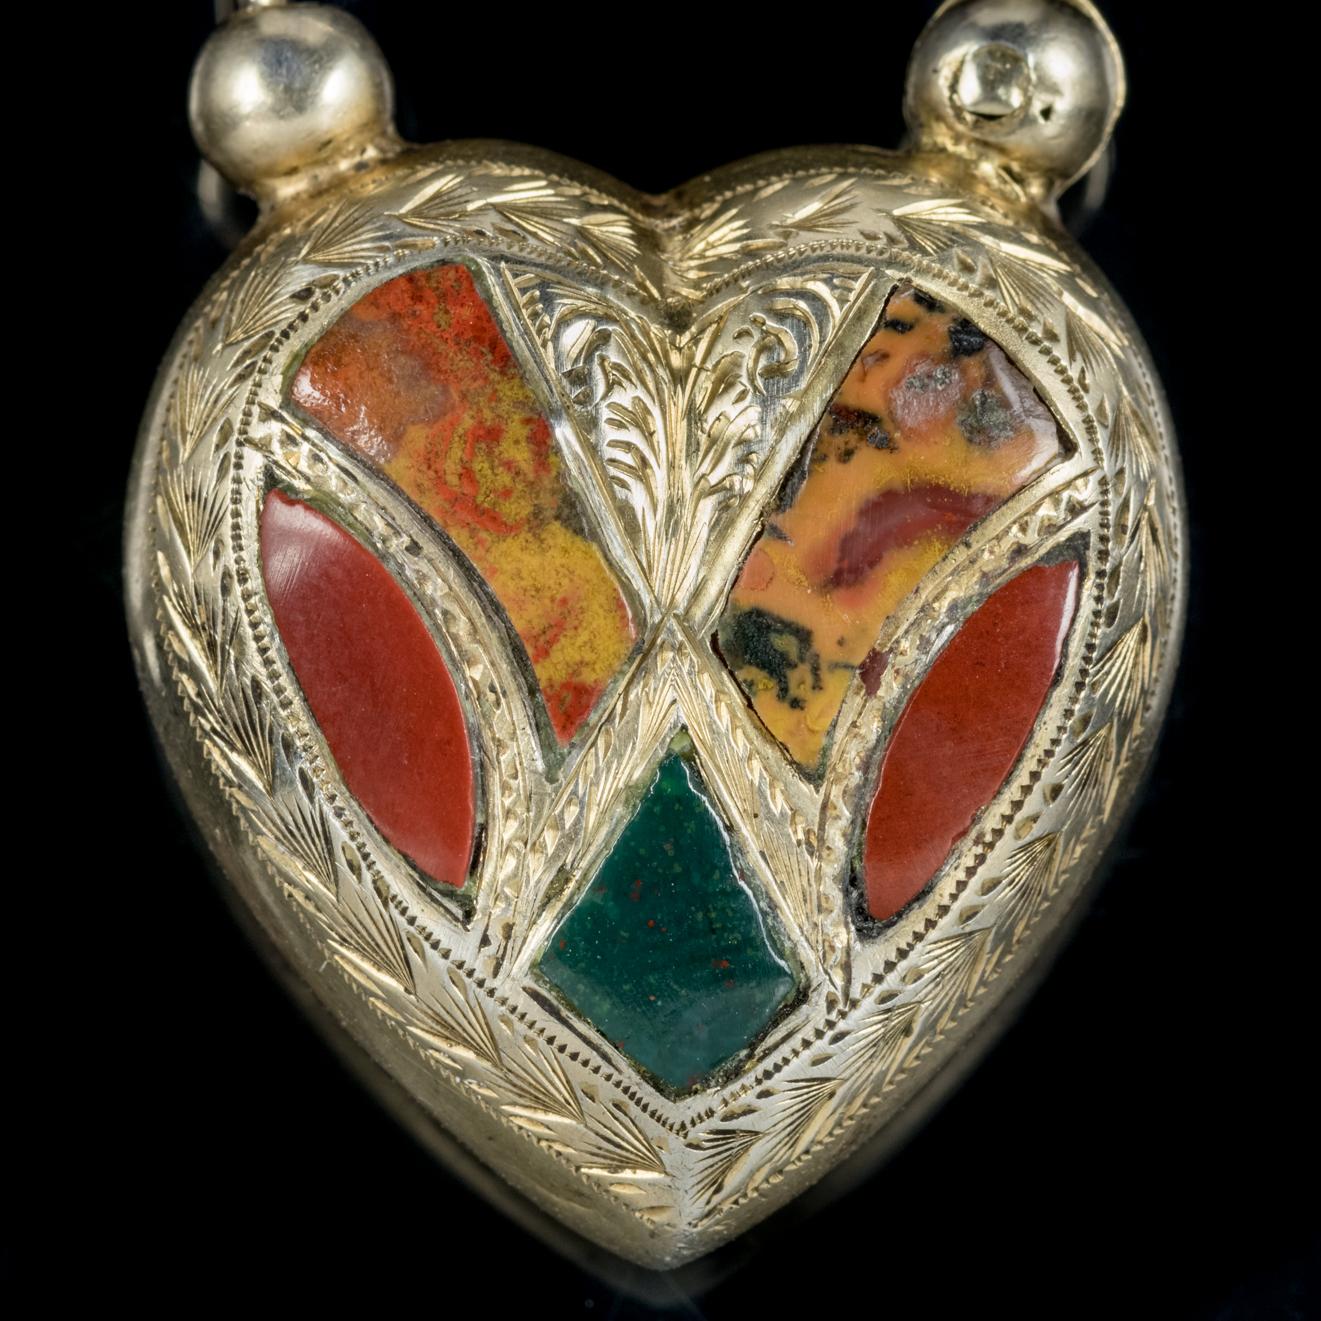 This delightful antique Scottish heart padlock is from the Victorian era, Circa 1860.

Scottish jewellery was made popular by Queen Victoria as it became a souvenir of her frequent trips to Scotland and her Scottish Castle Balmoral from the mid